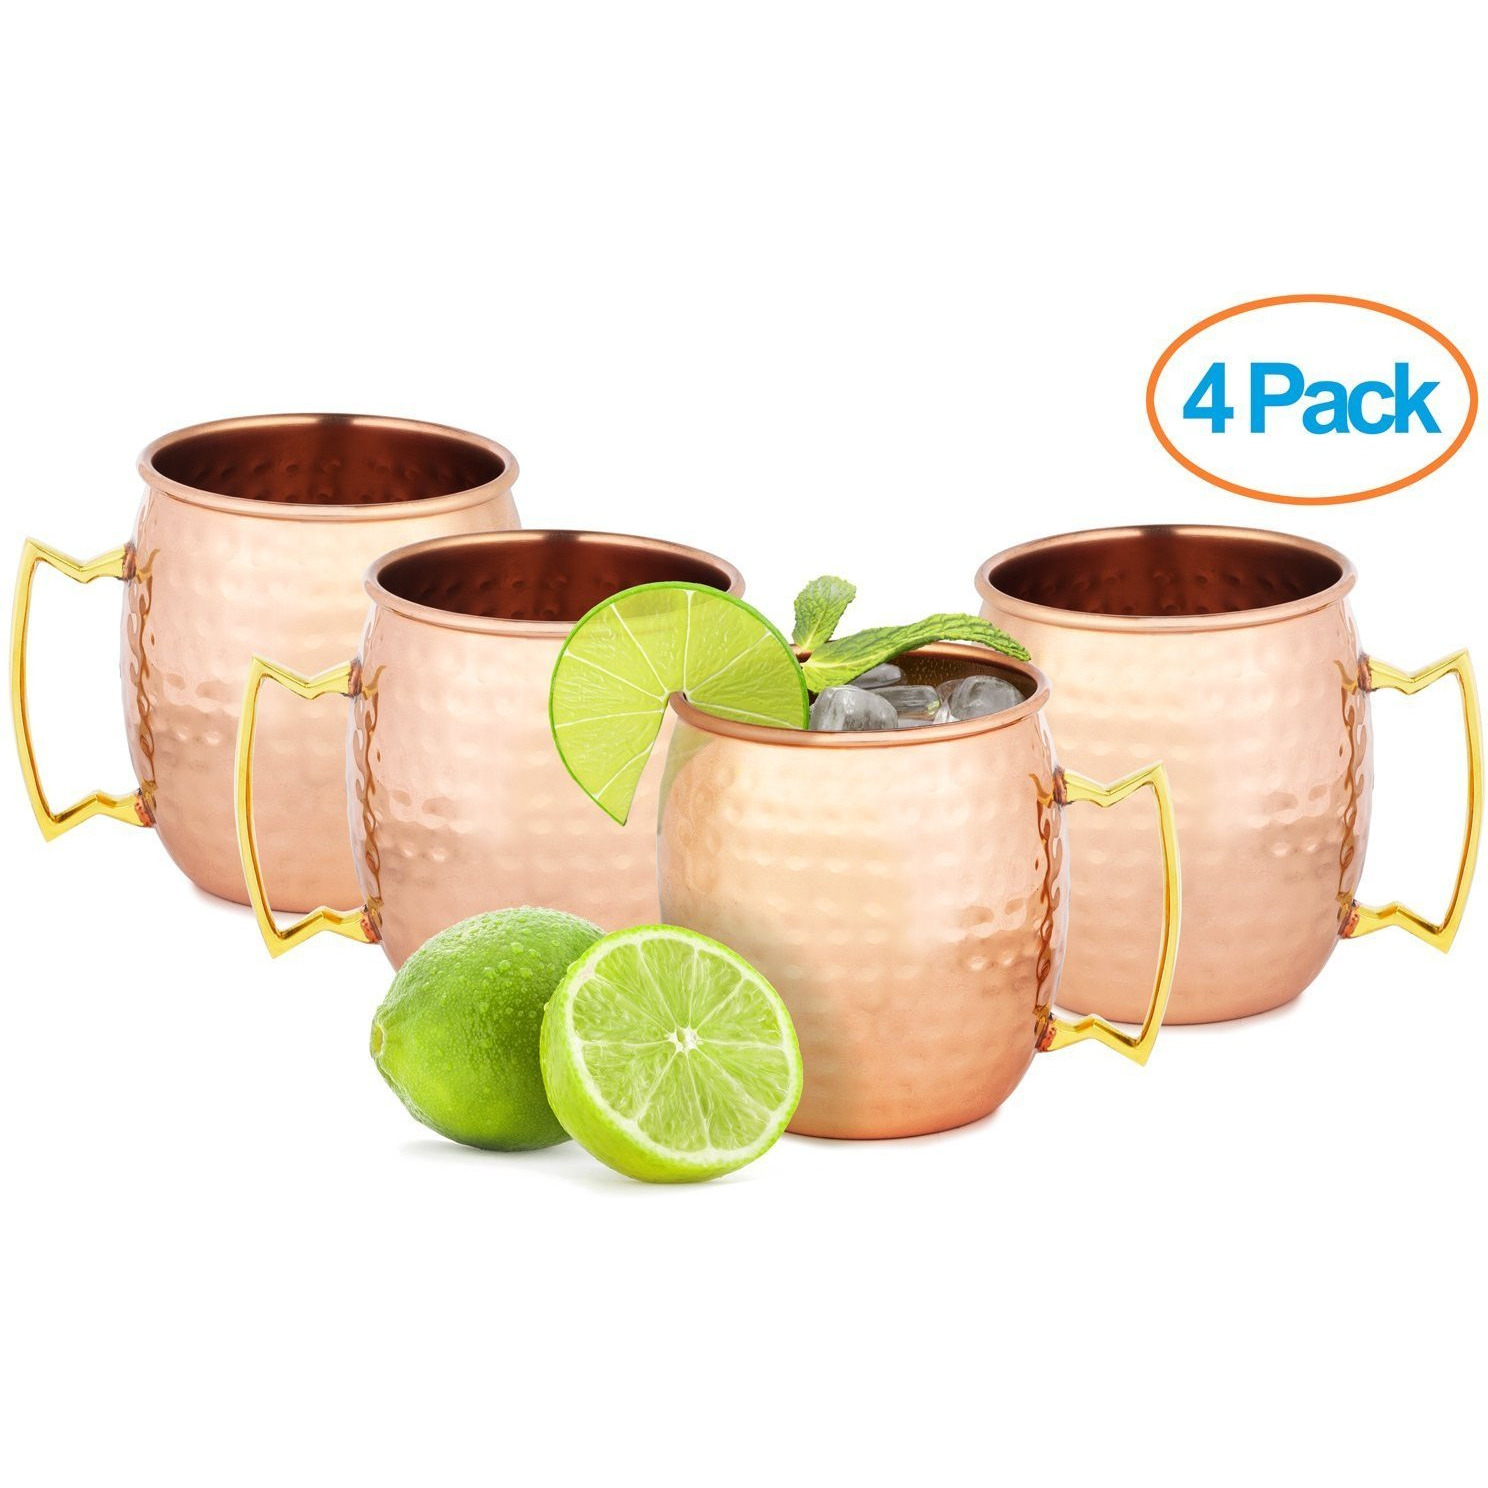 Winmaarc Handmade 100% Pure Copper Moscow Mule Mugs Set of 4 Cups 18 OZ